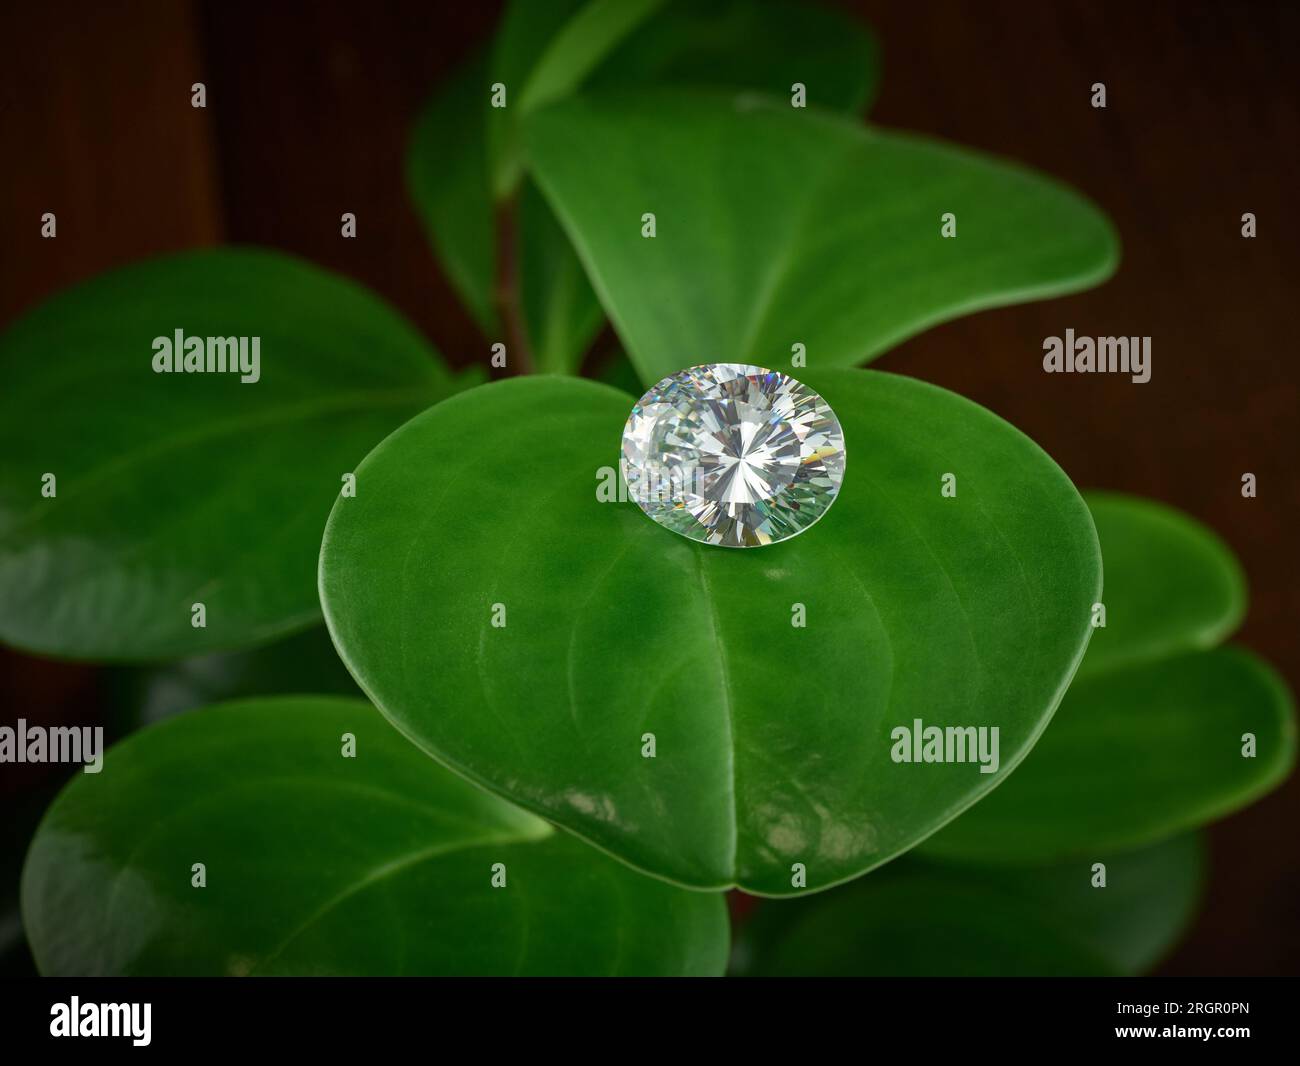 Oval Lab Grown Ethical Diamond on Green Leaf Background Stock Photo